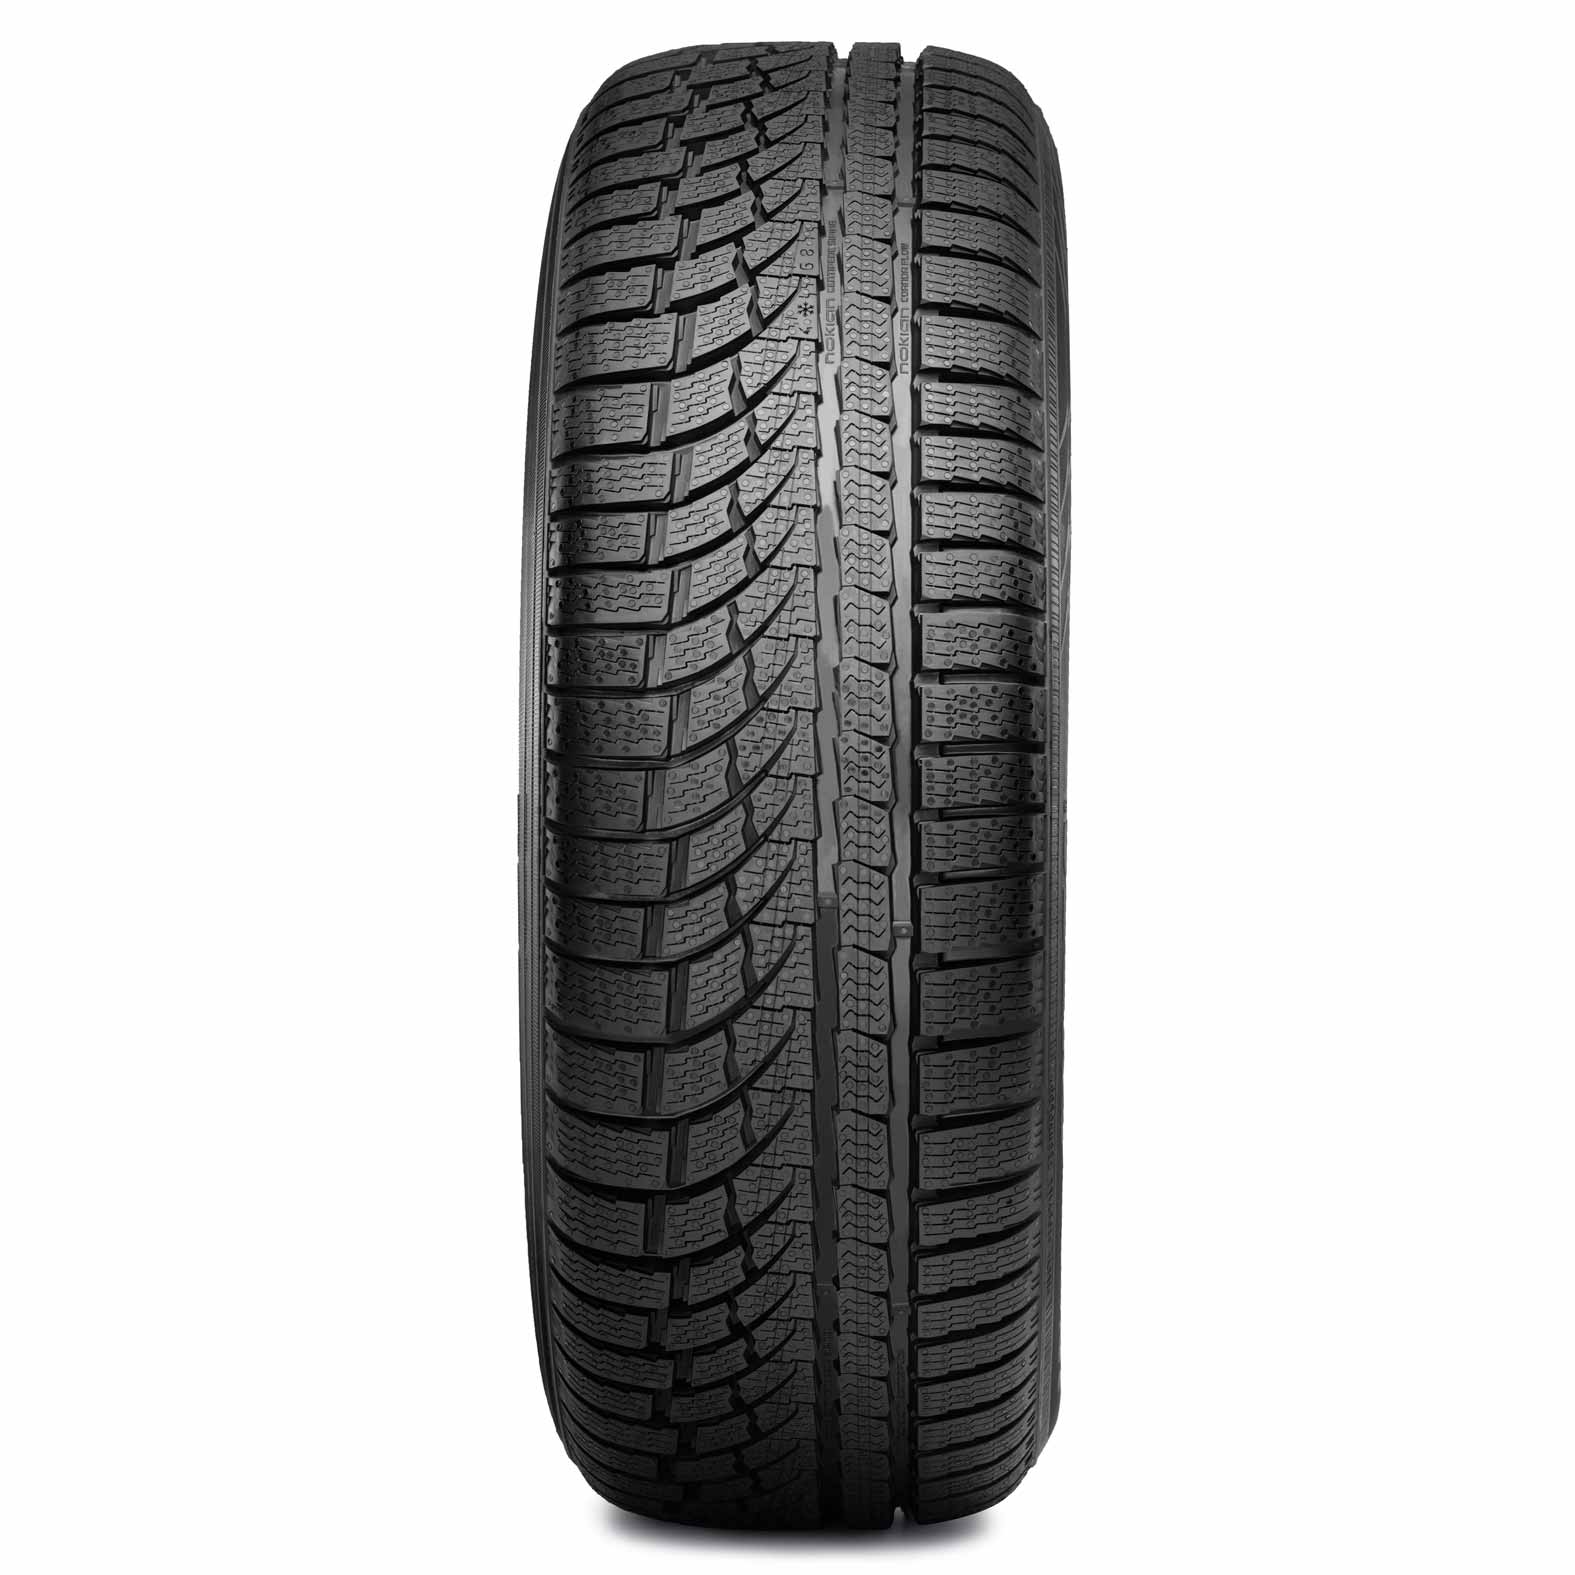 All-Weather for Tire Nokian Kal Tires WRG4 |